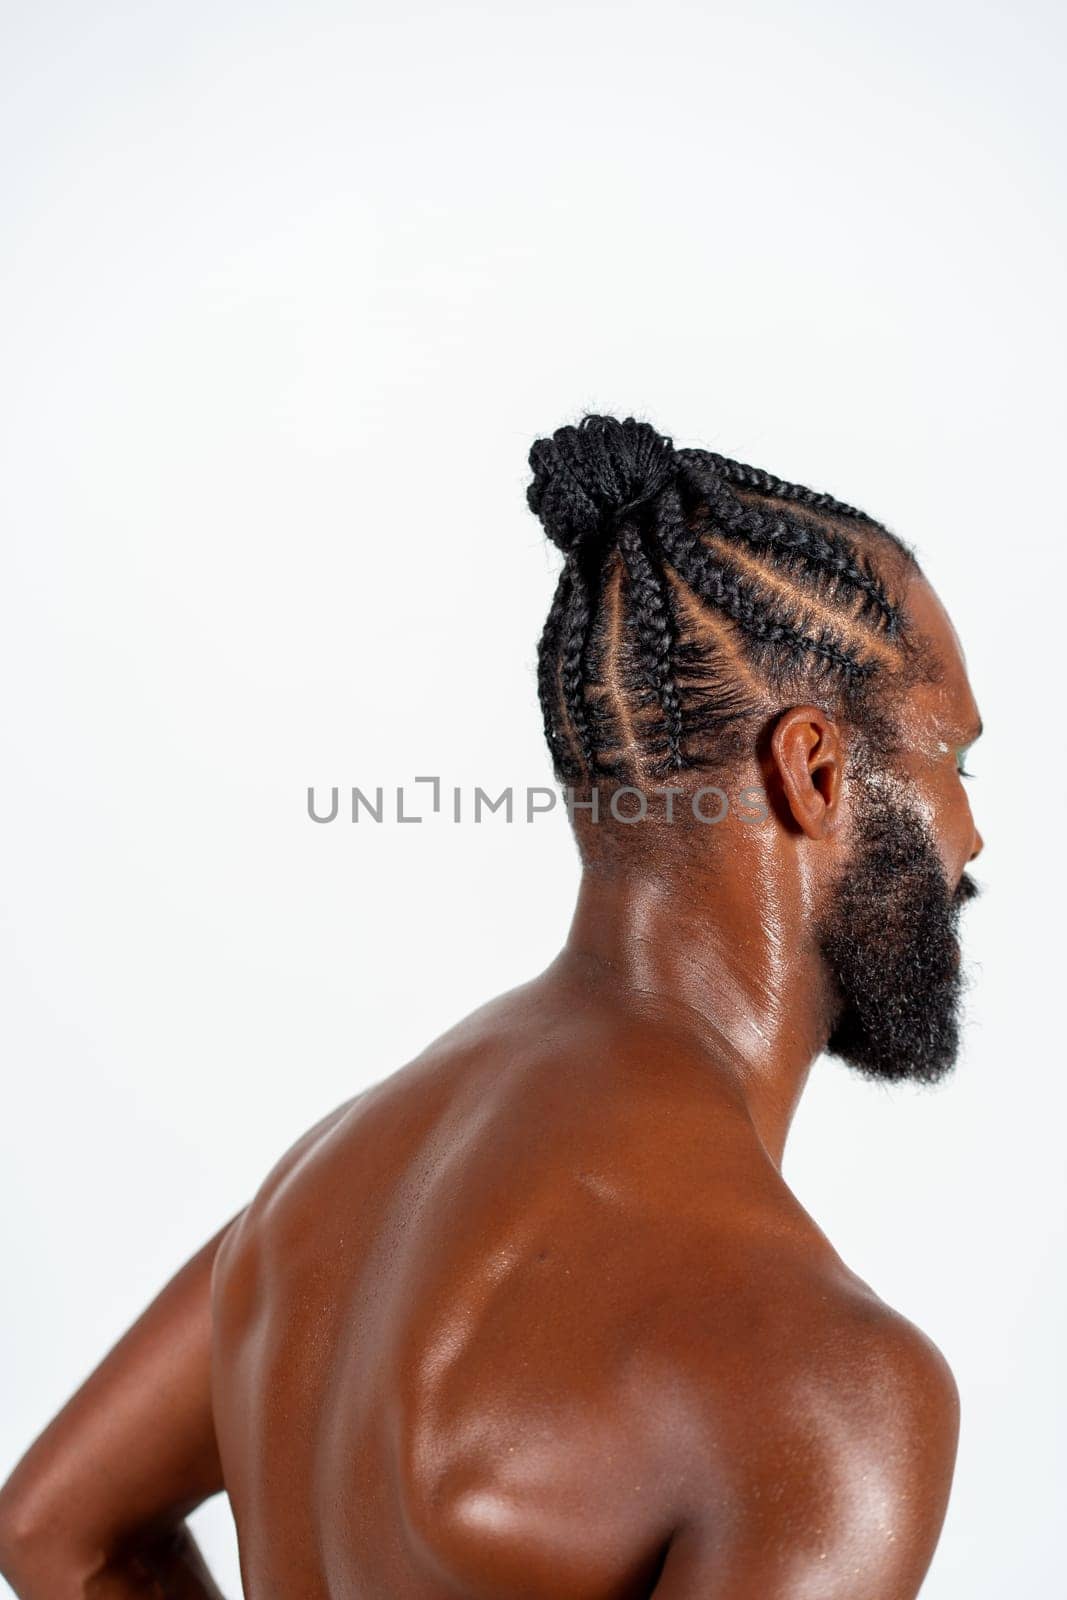 Side view of shirtless African American gay man with braided hairstyle. Bearded athletic male showcases his muscular back against white background.